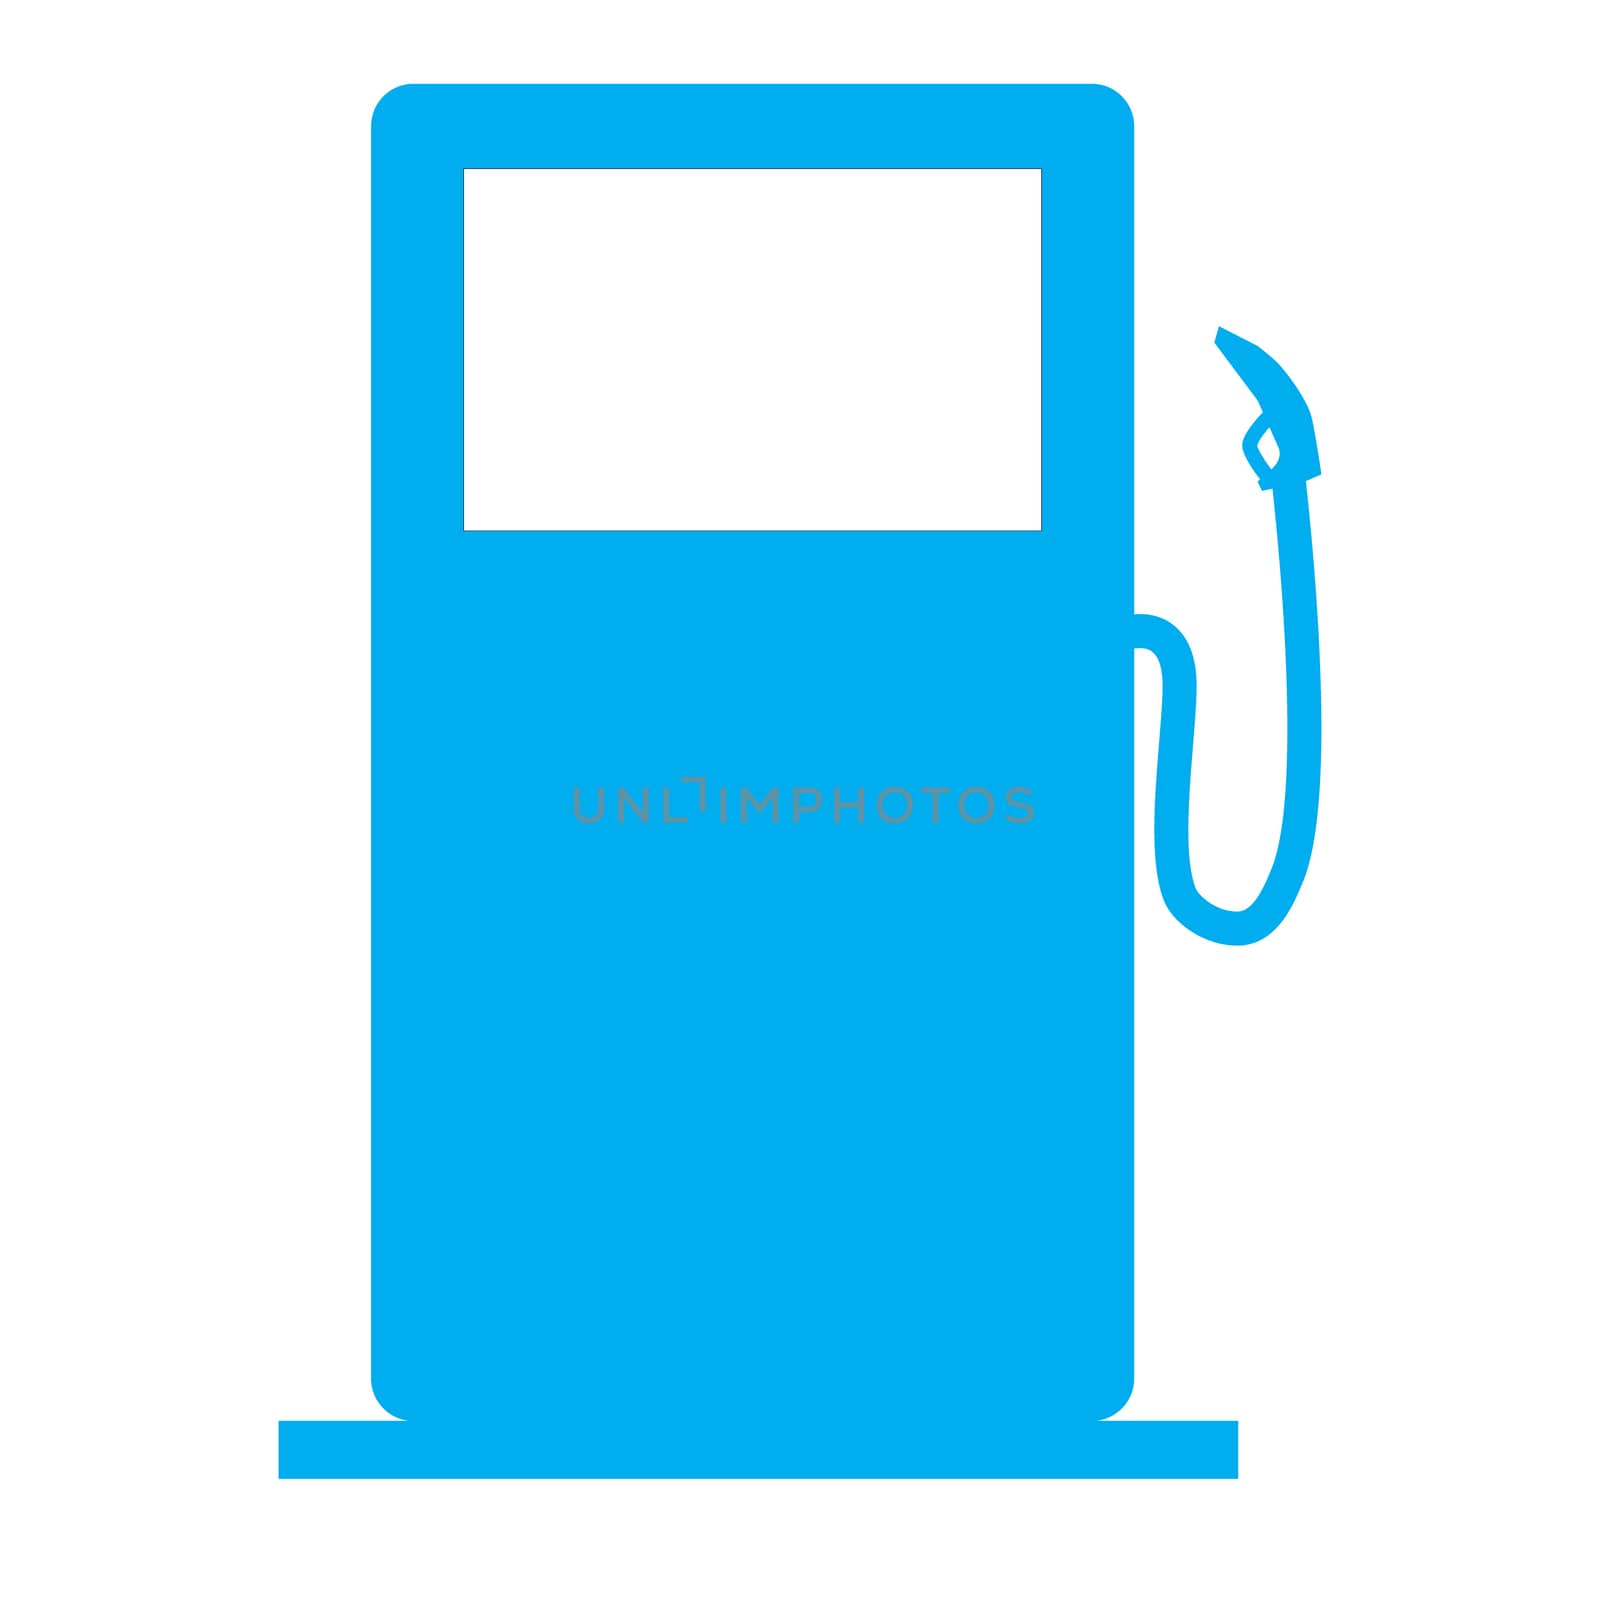 gas station icon on white background. flat style. gas station si by suthee